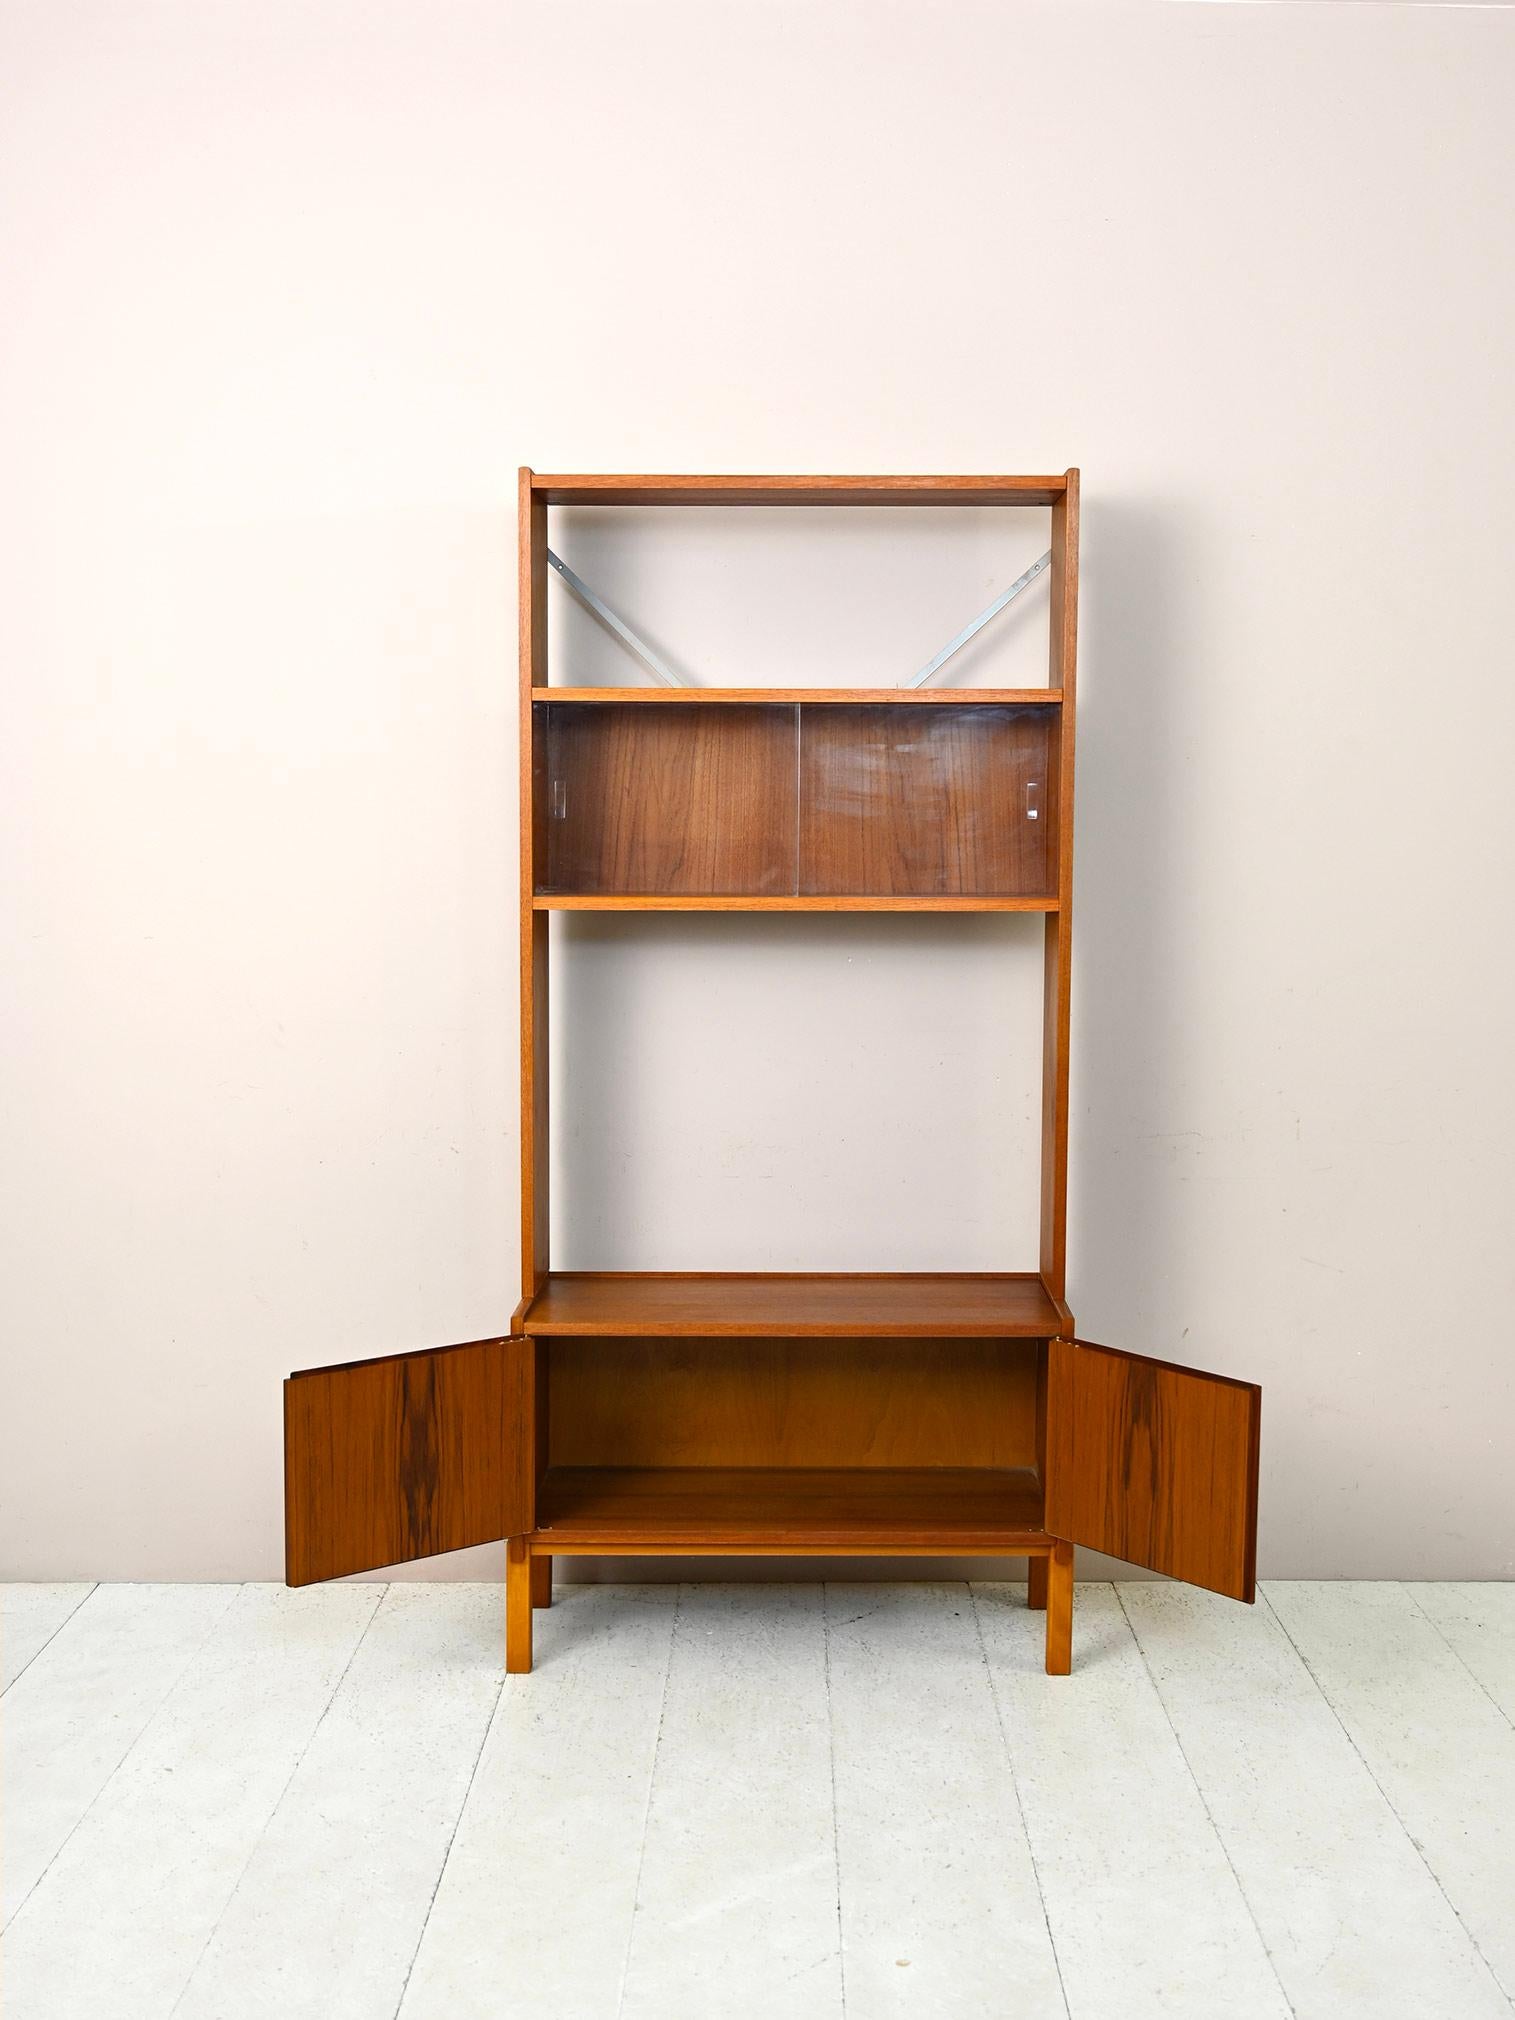 1960s storage cabinet with bookcase.

Original piece of Scandinavian modern antique furniture consisting of a low cabinet on which rests a frame with a shelf and a display cabinet.
The cabinet with storage space has two lockable hinged doors and can